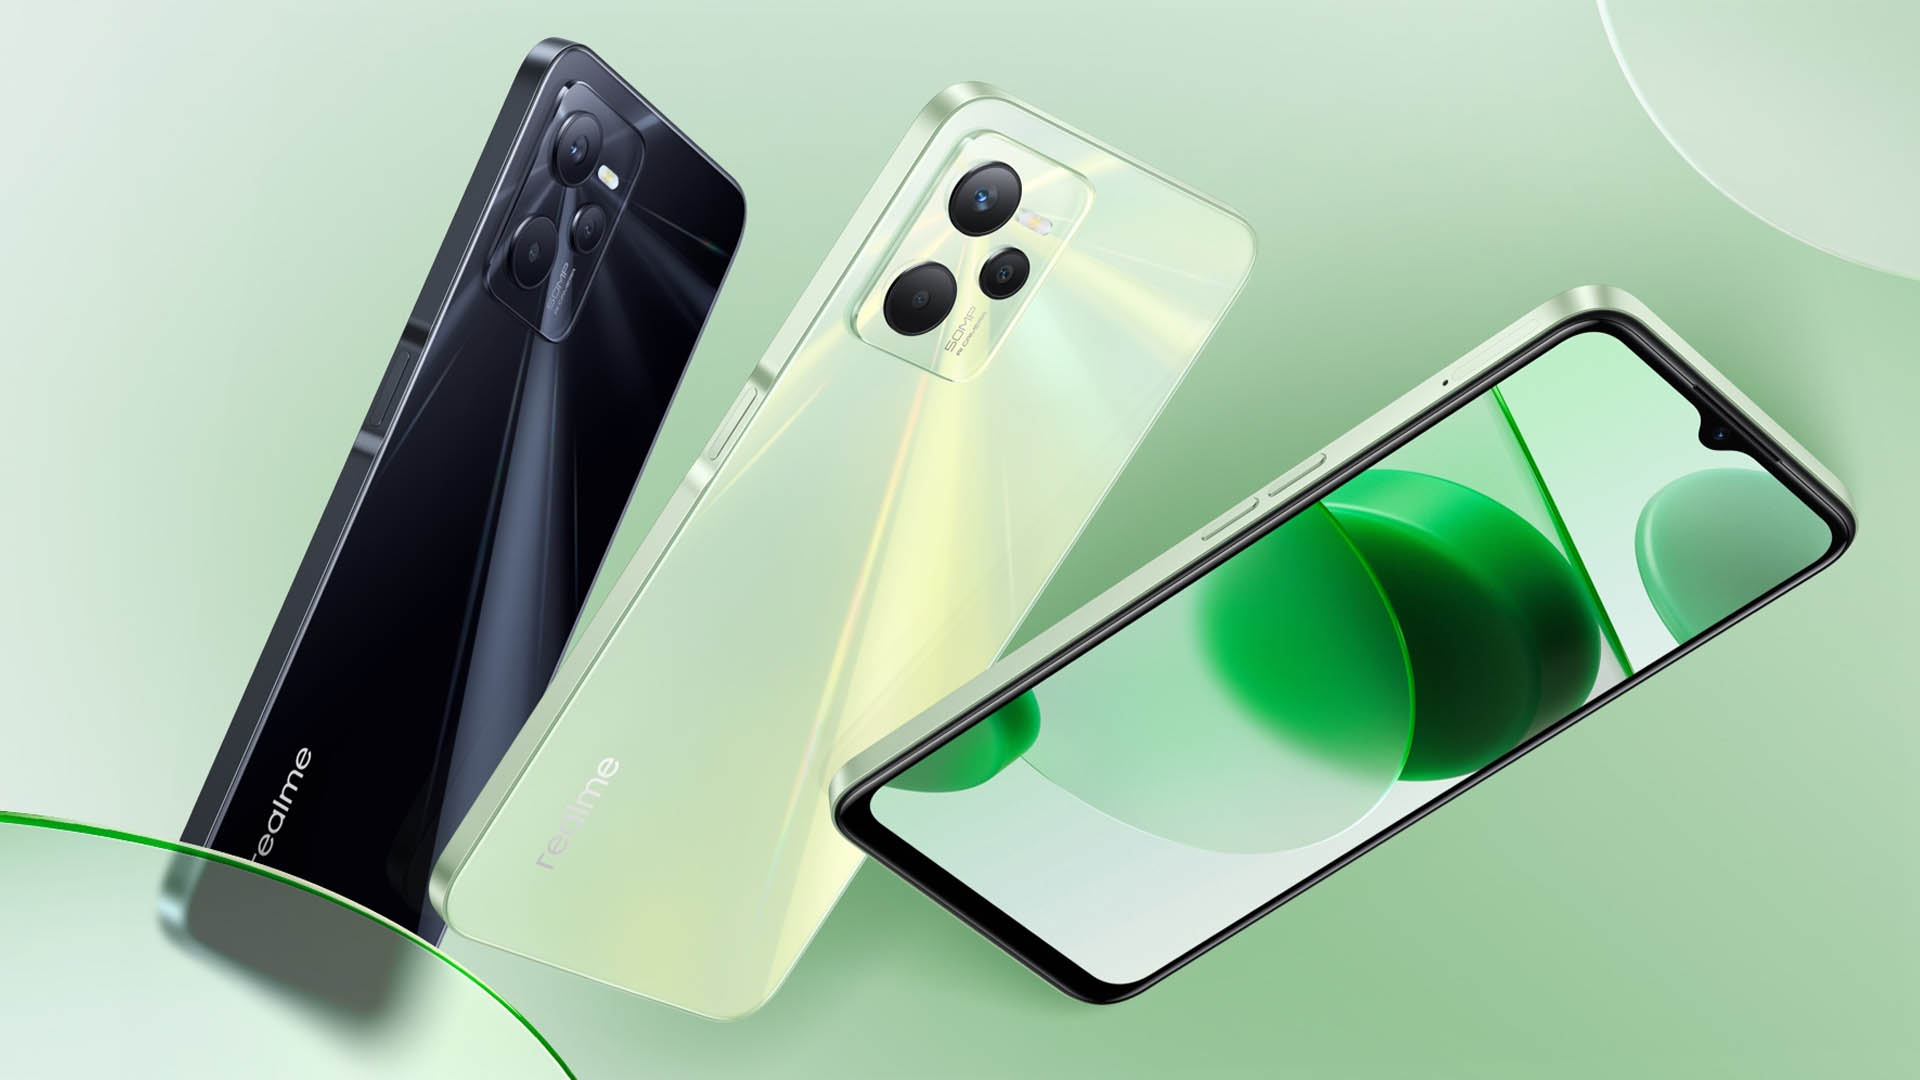  The image shows the Realme GT 6 global launch event in Milan, Italy, with three phones in black, green, and white colors.